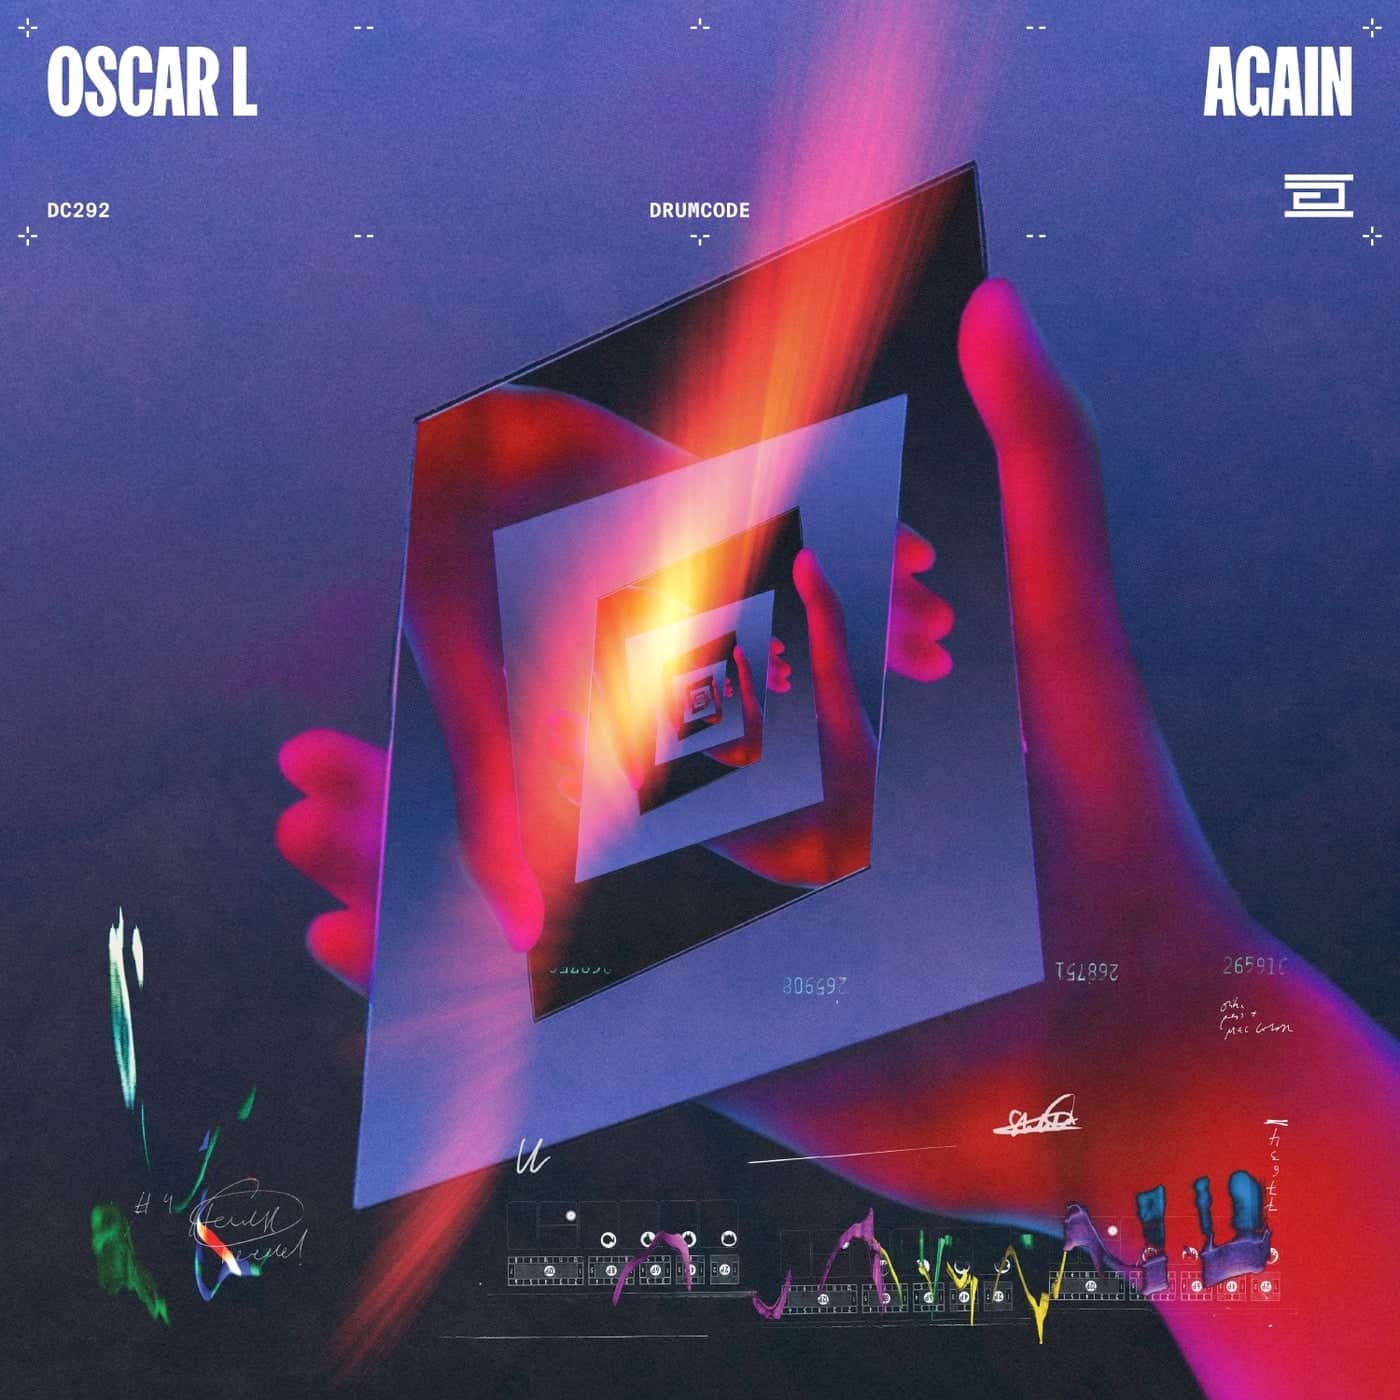 image cover: Oscar L - Again on Drumcode